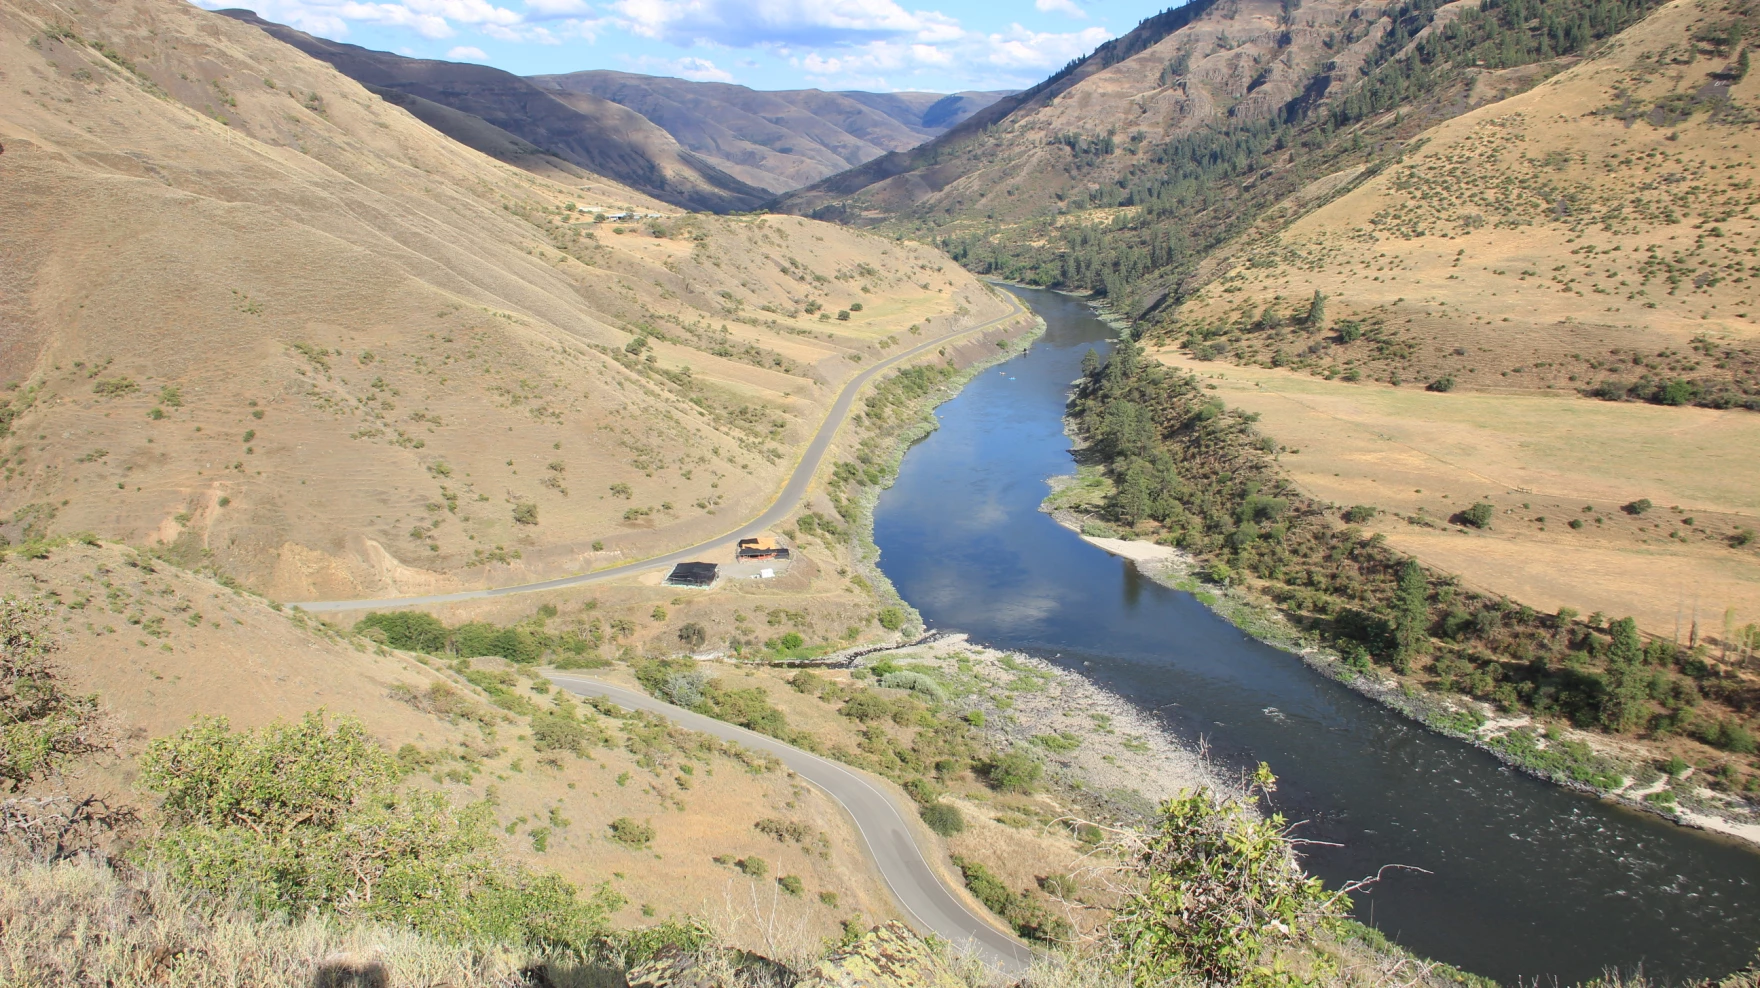 Overview of the Cooper’s Ferry site in the lower Salmon River canyon of western Idaho, where several stone points dating back nearly 16,000 years have been unearthed.